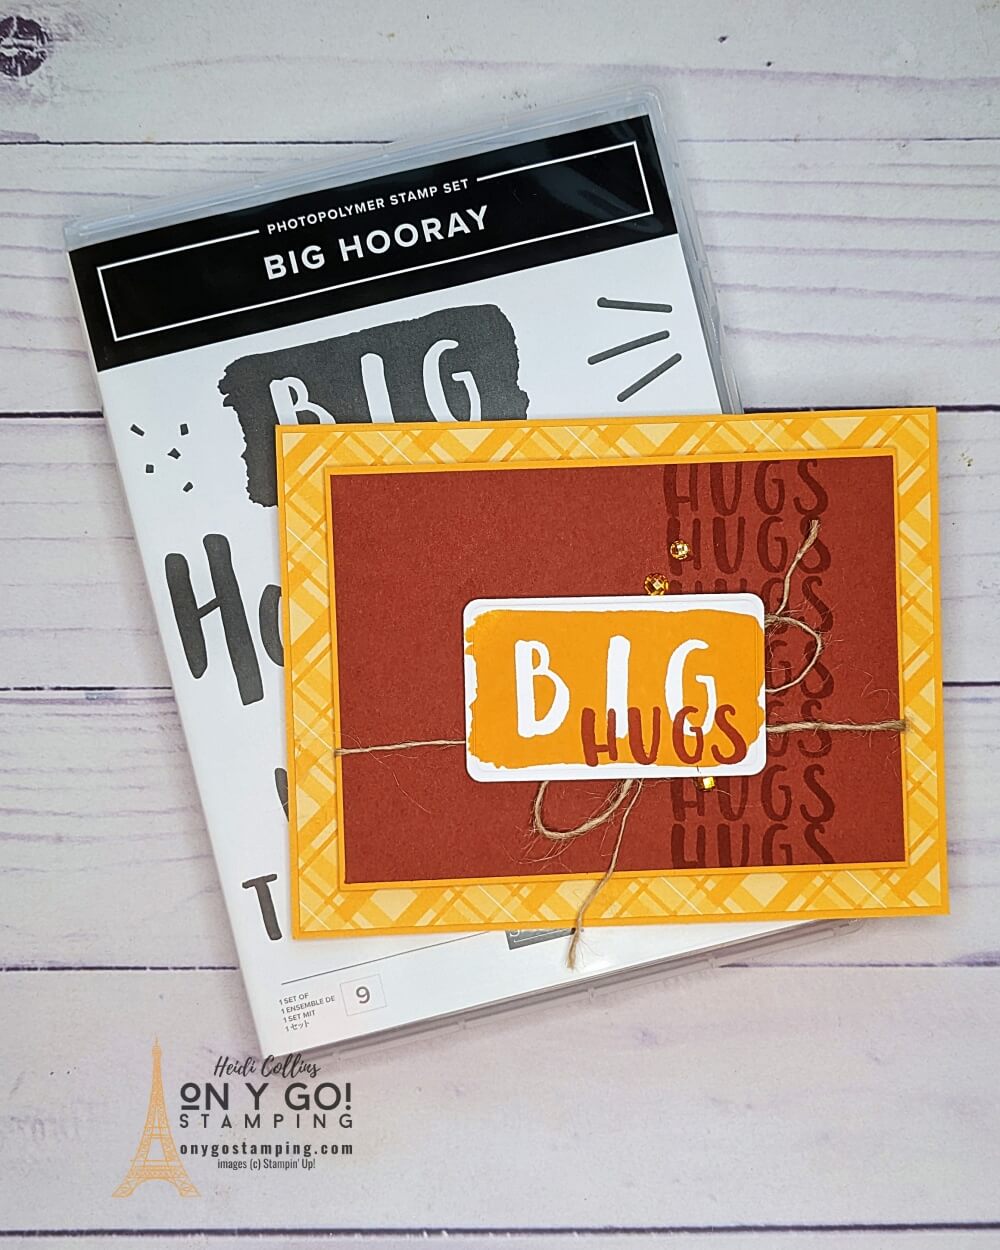 Let someone know you care about them with this simple handmade card idea using the Big Hooray stamp set from Stampin' Up!®